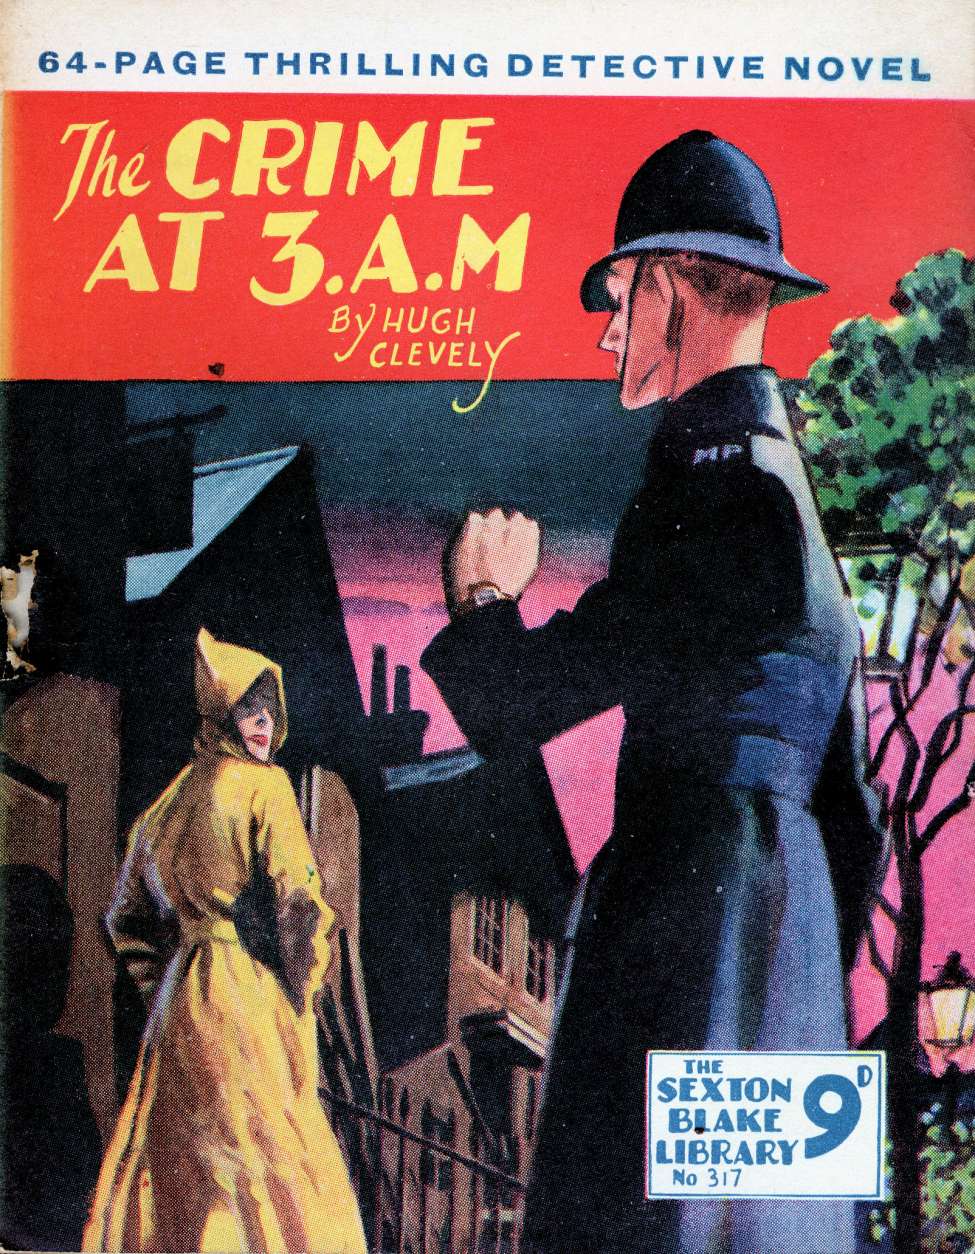 Comic Book Cover For Sexton Blake Library S3 317 - The Crime at 3.a.m